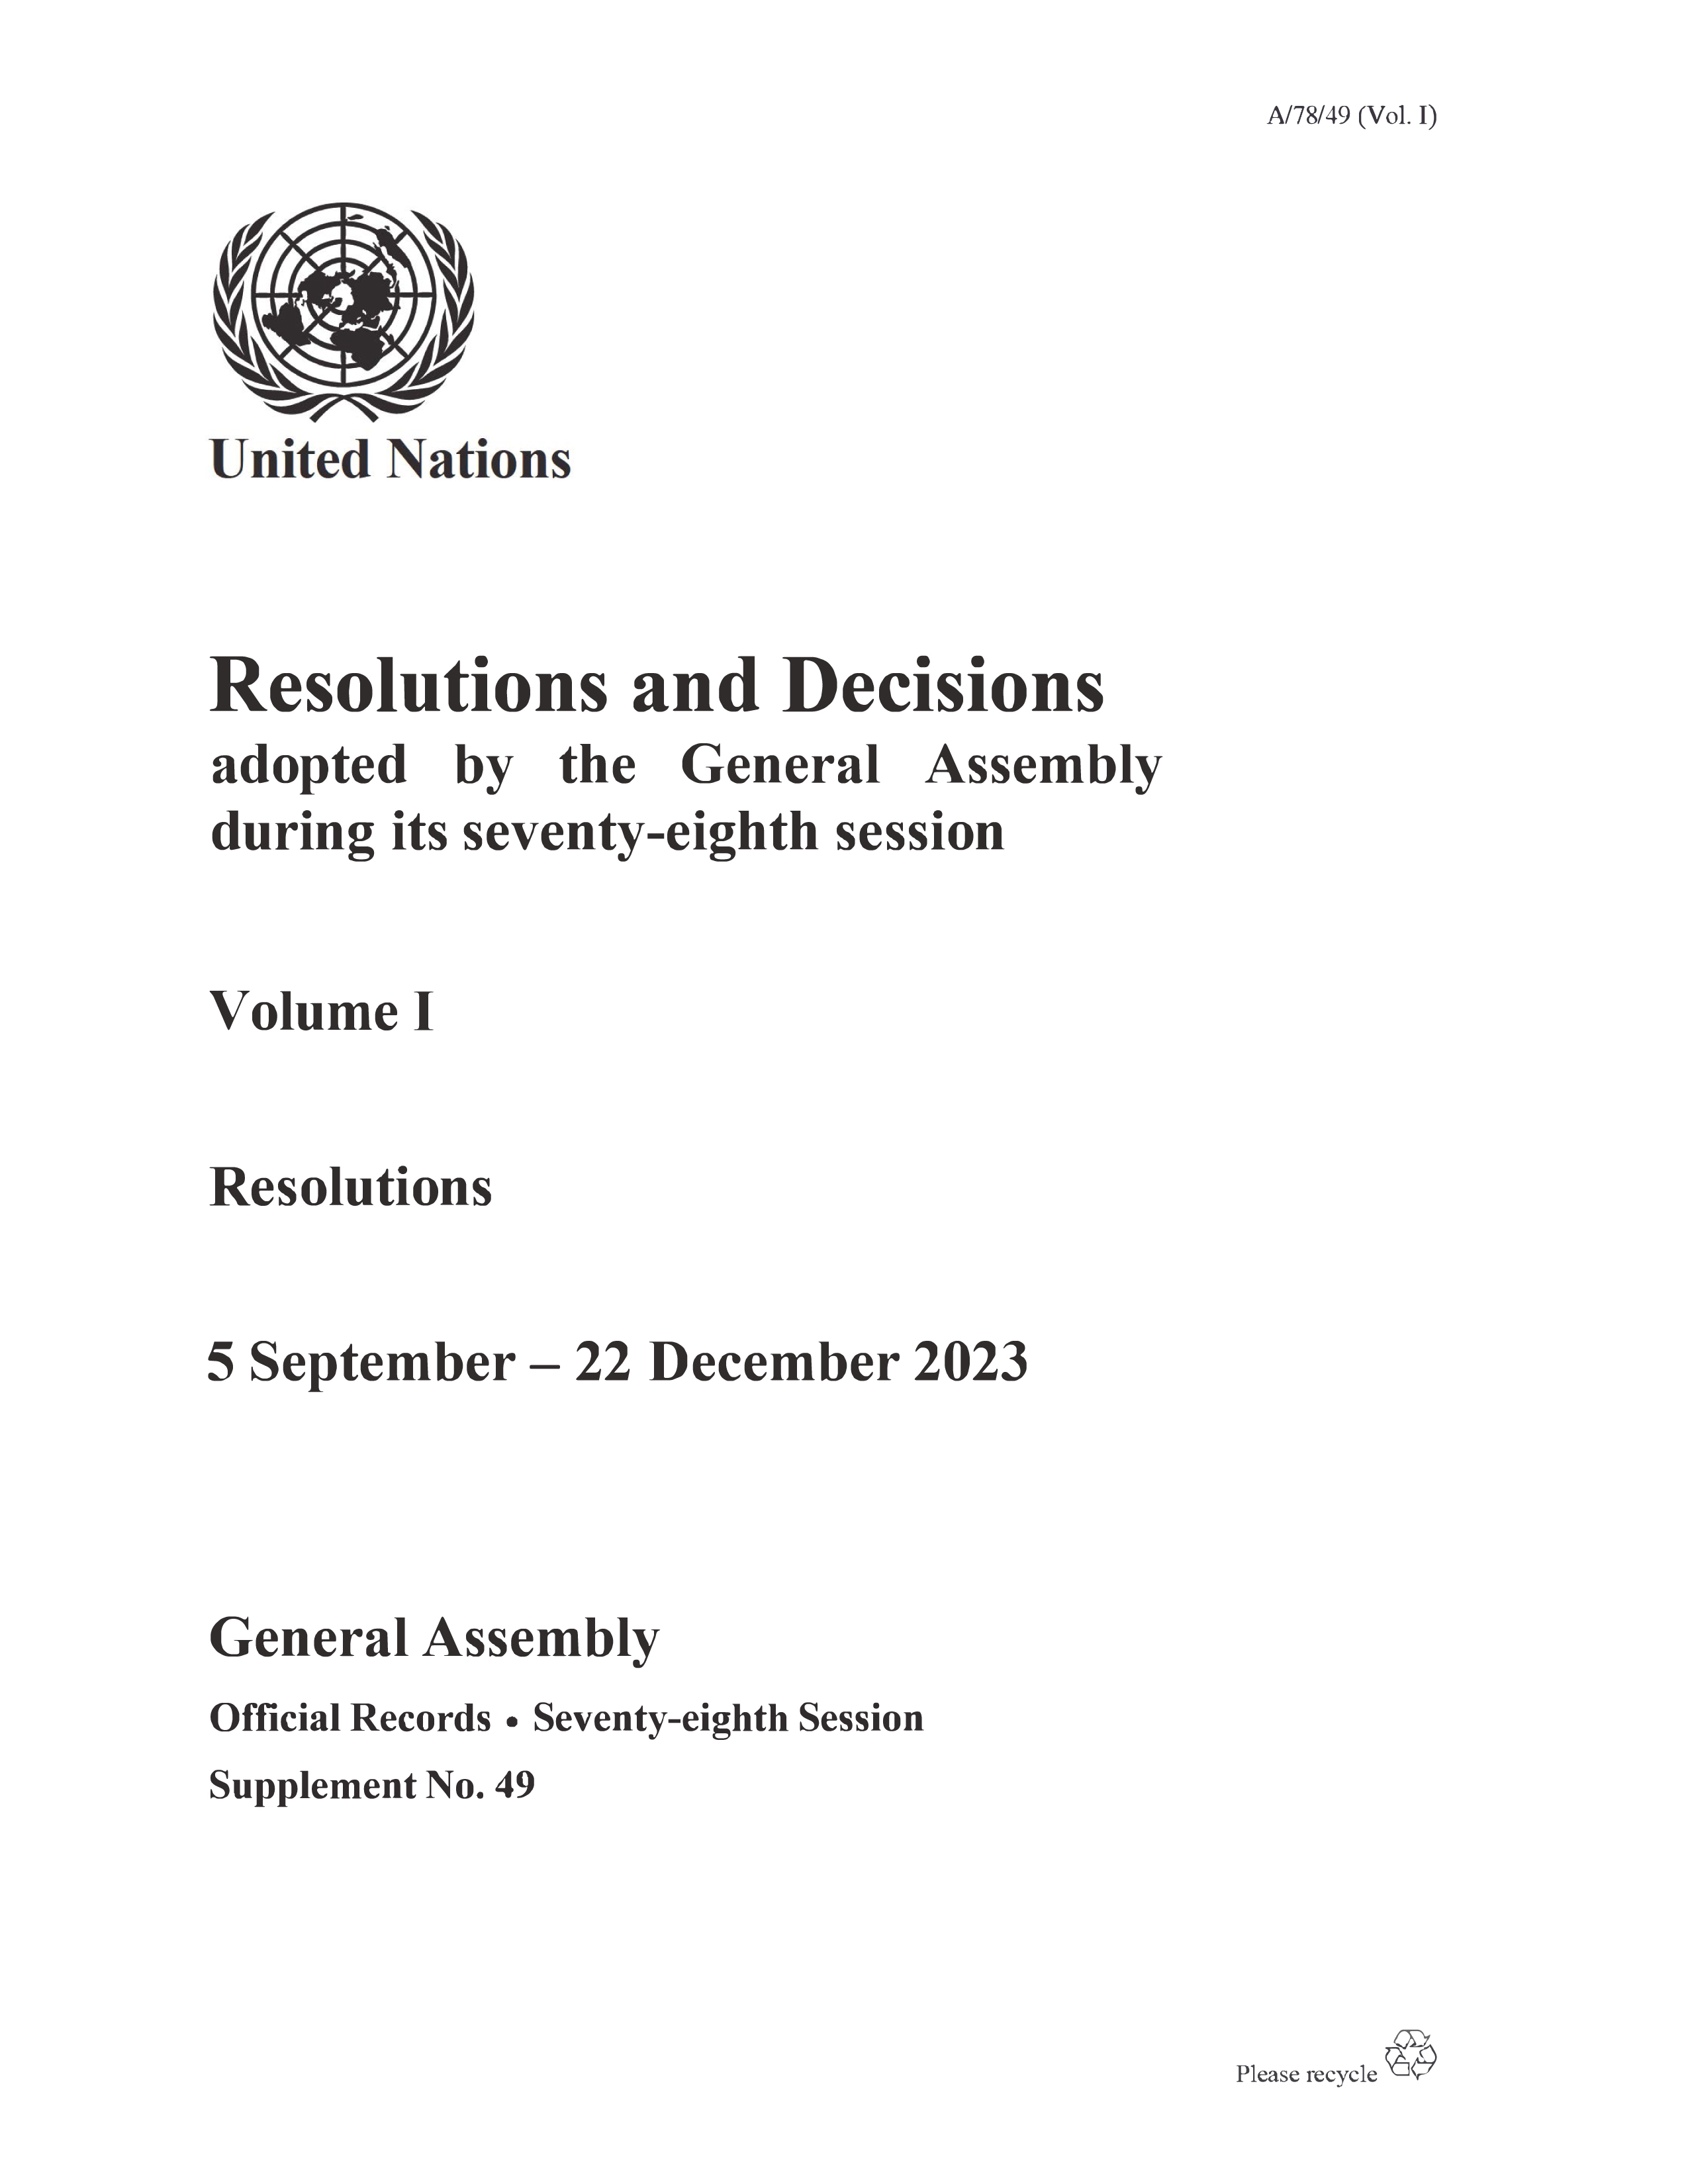 image of Resolutions and Decisions Adopted by the General Assembly During its Seventy-eighth Session: Volume I